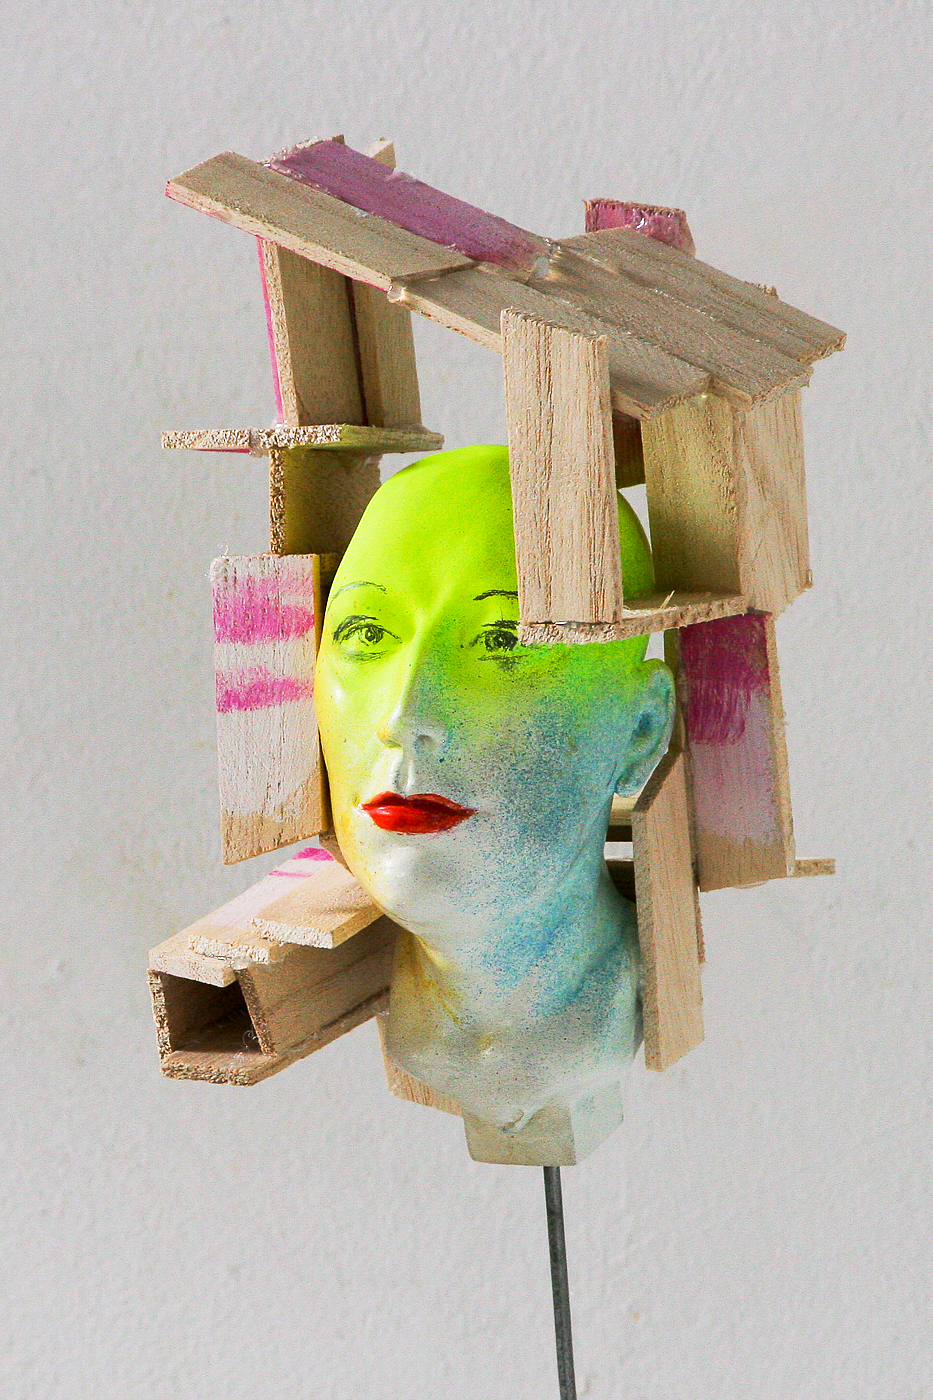 State of Mind (In House) 15x25x15cm, mixed materials